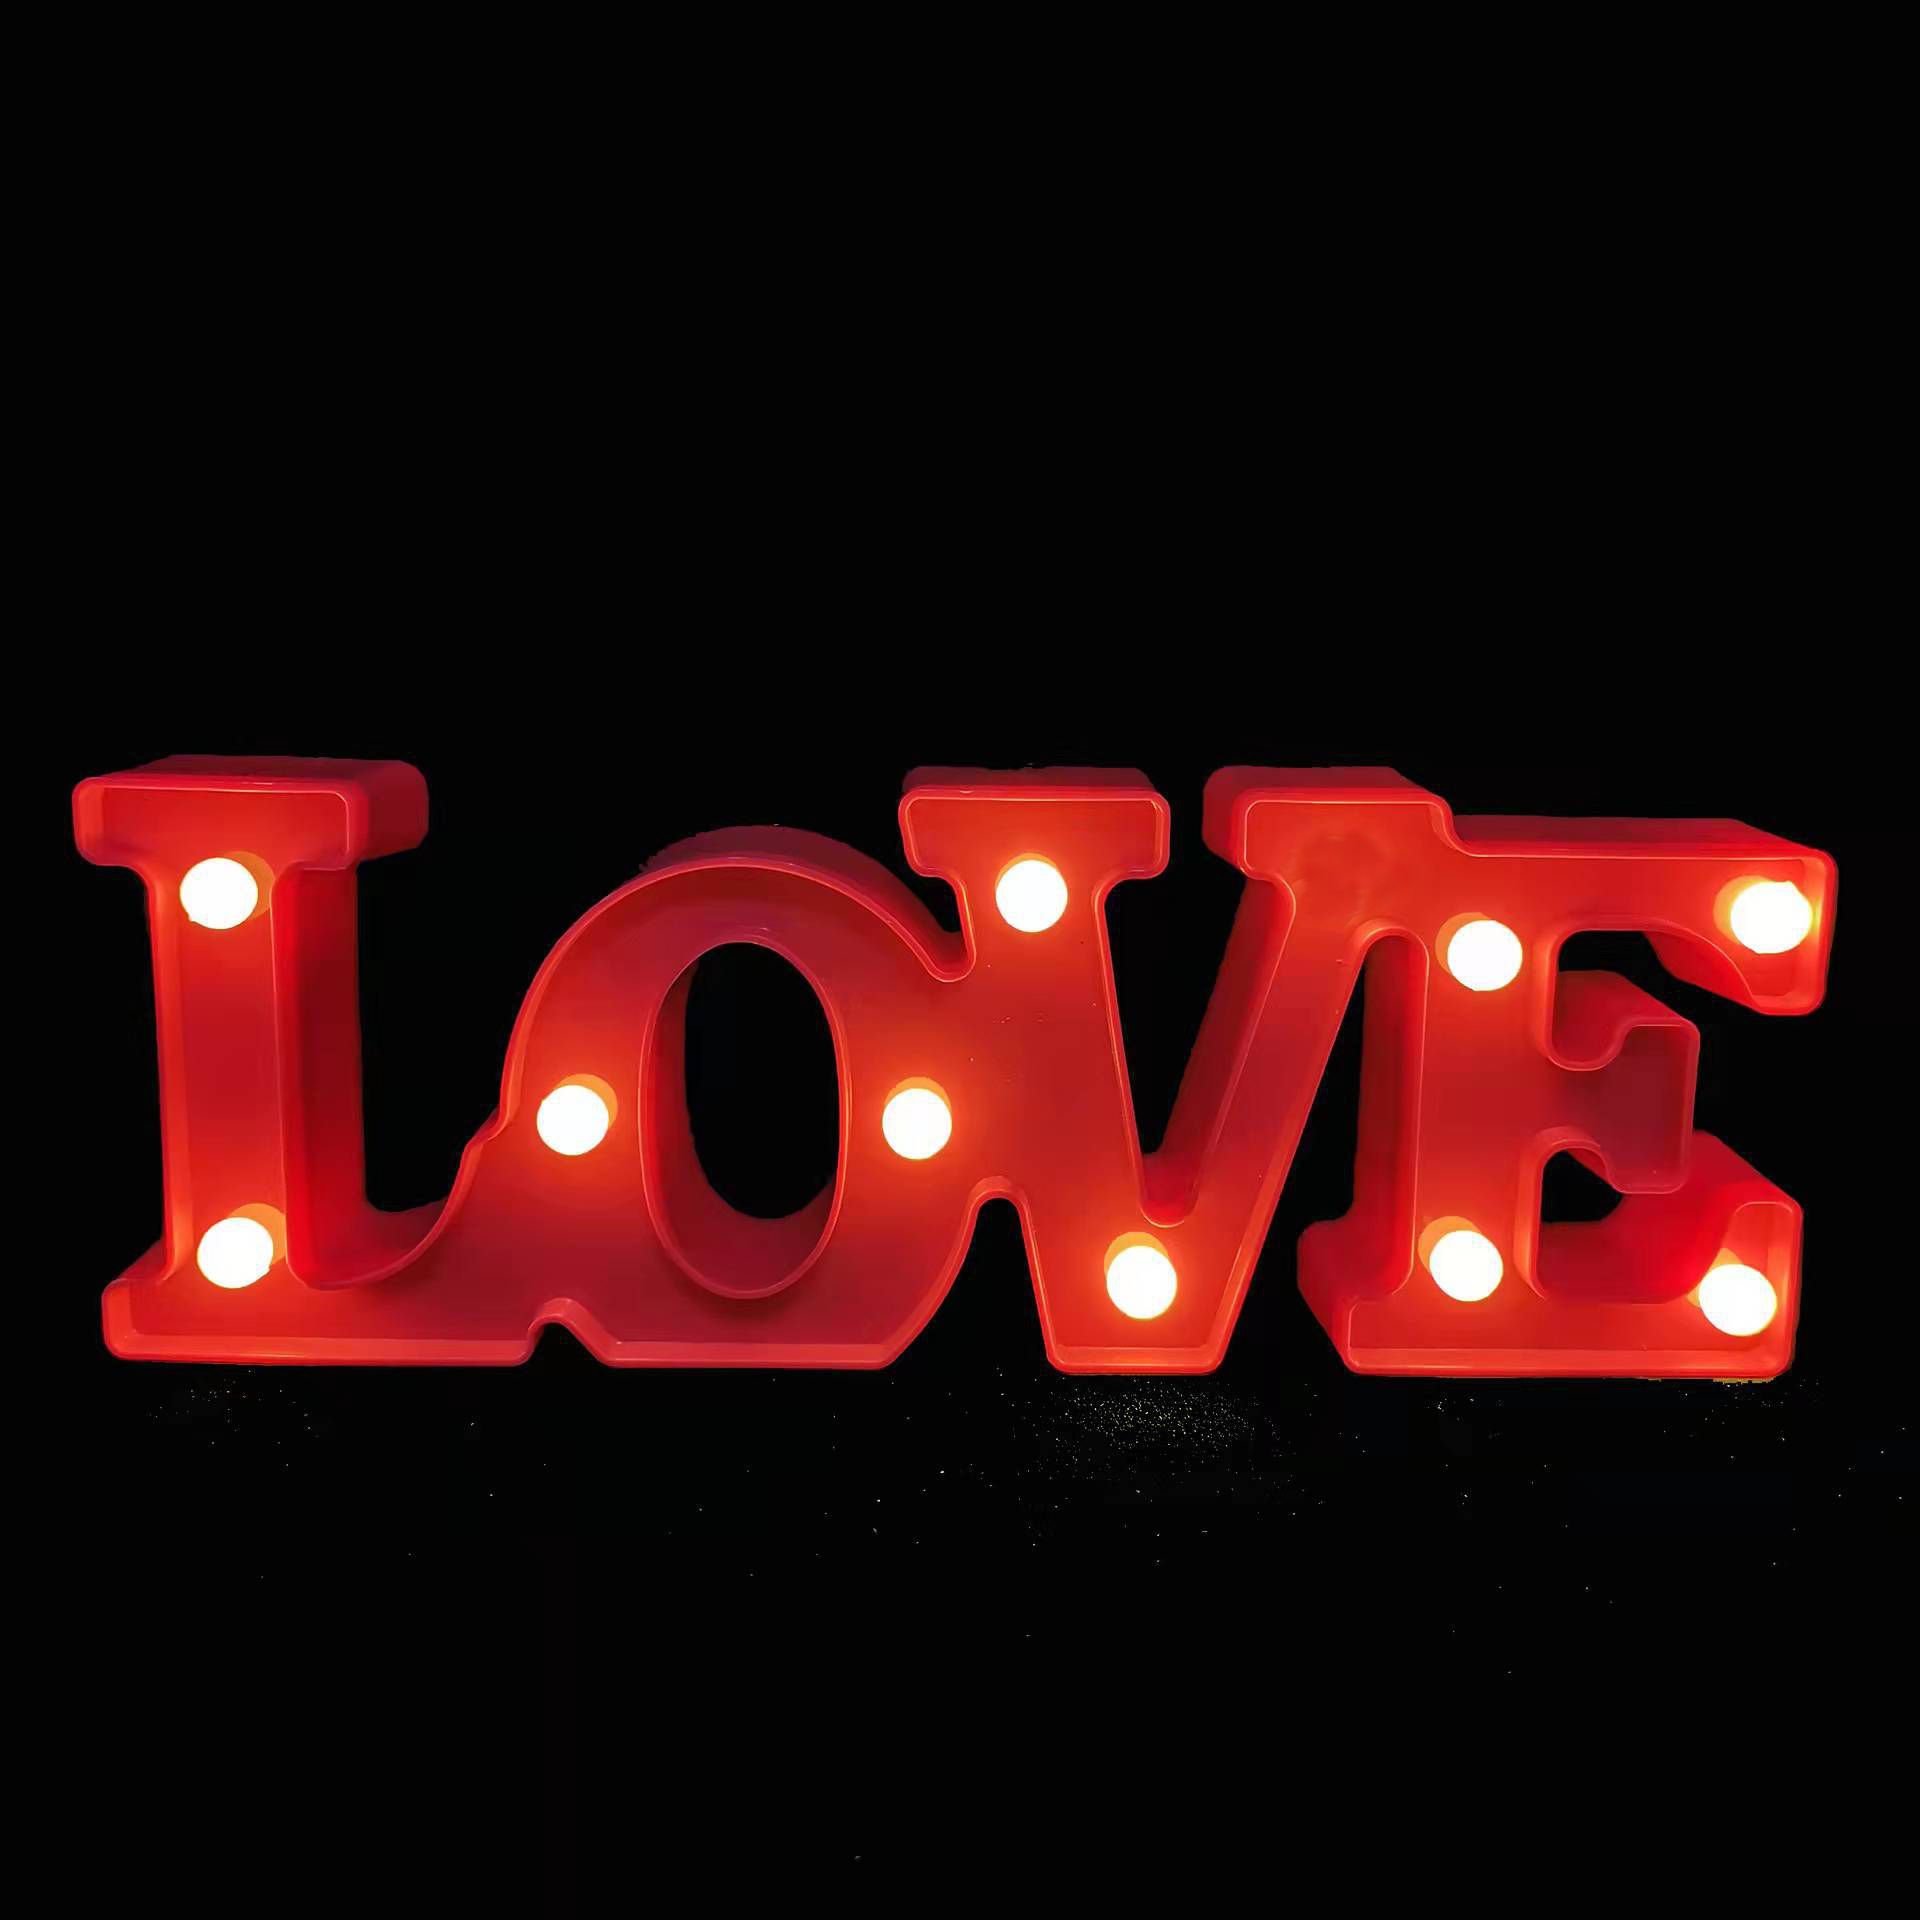 Led Neon Love Conjoined Shape Letters Lamp